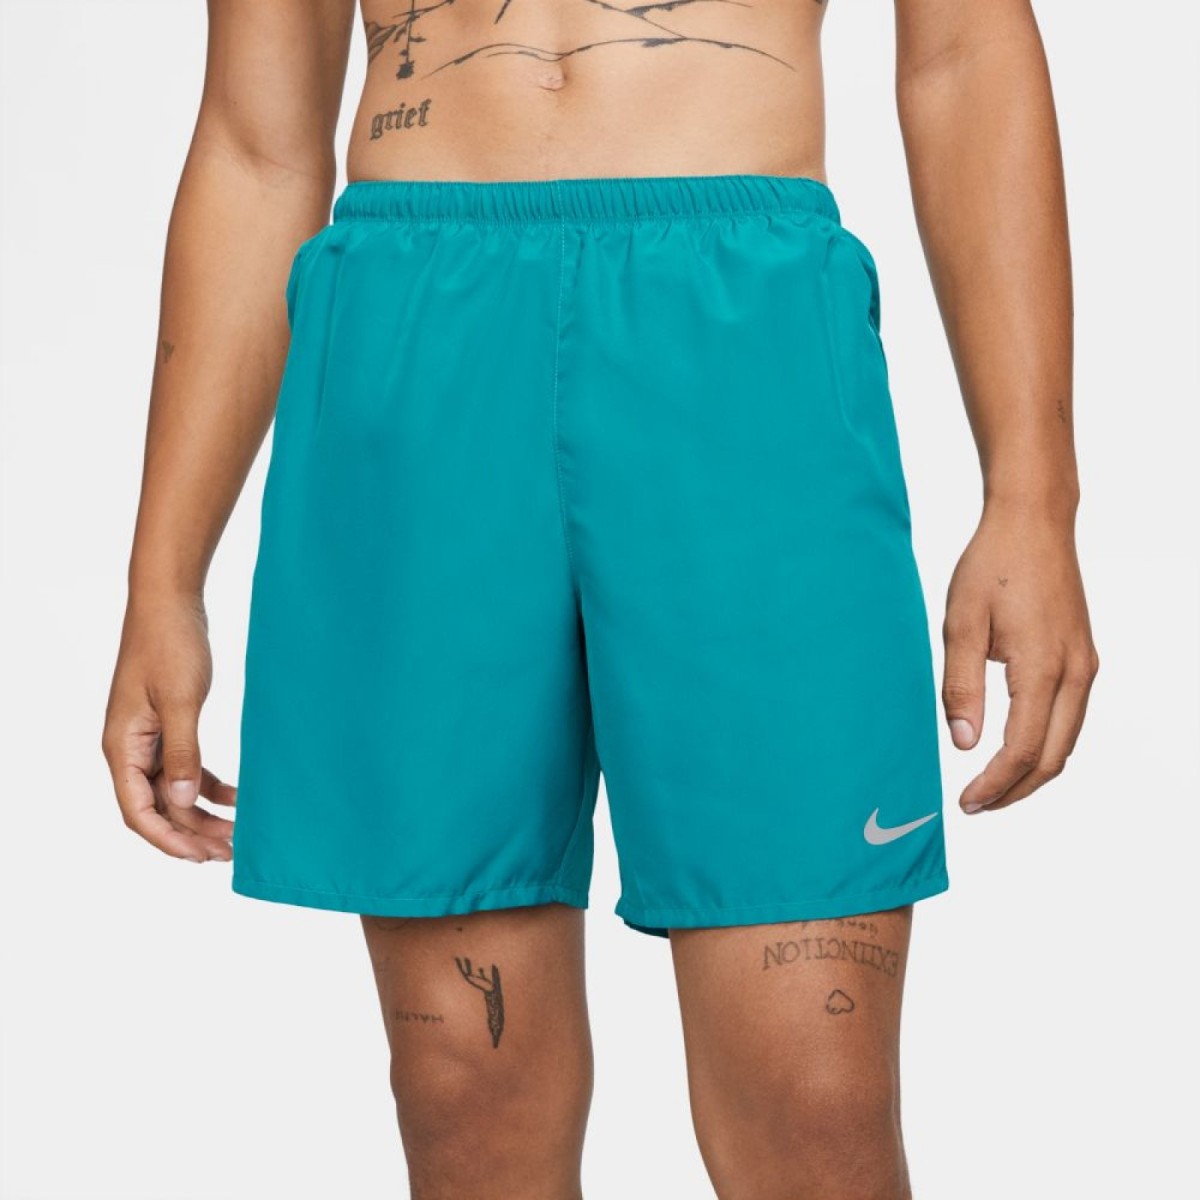 The iconic Nike Challenger Shorts deliver woven comfort with an all-new ...